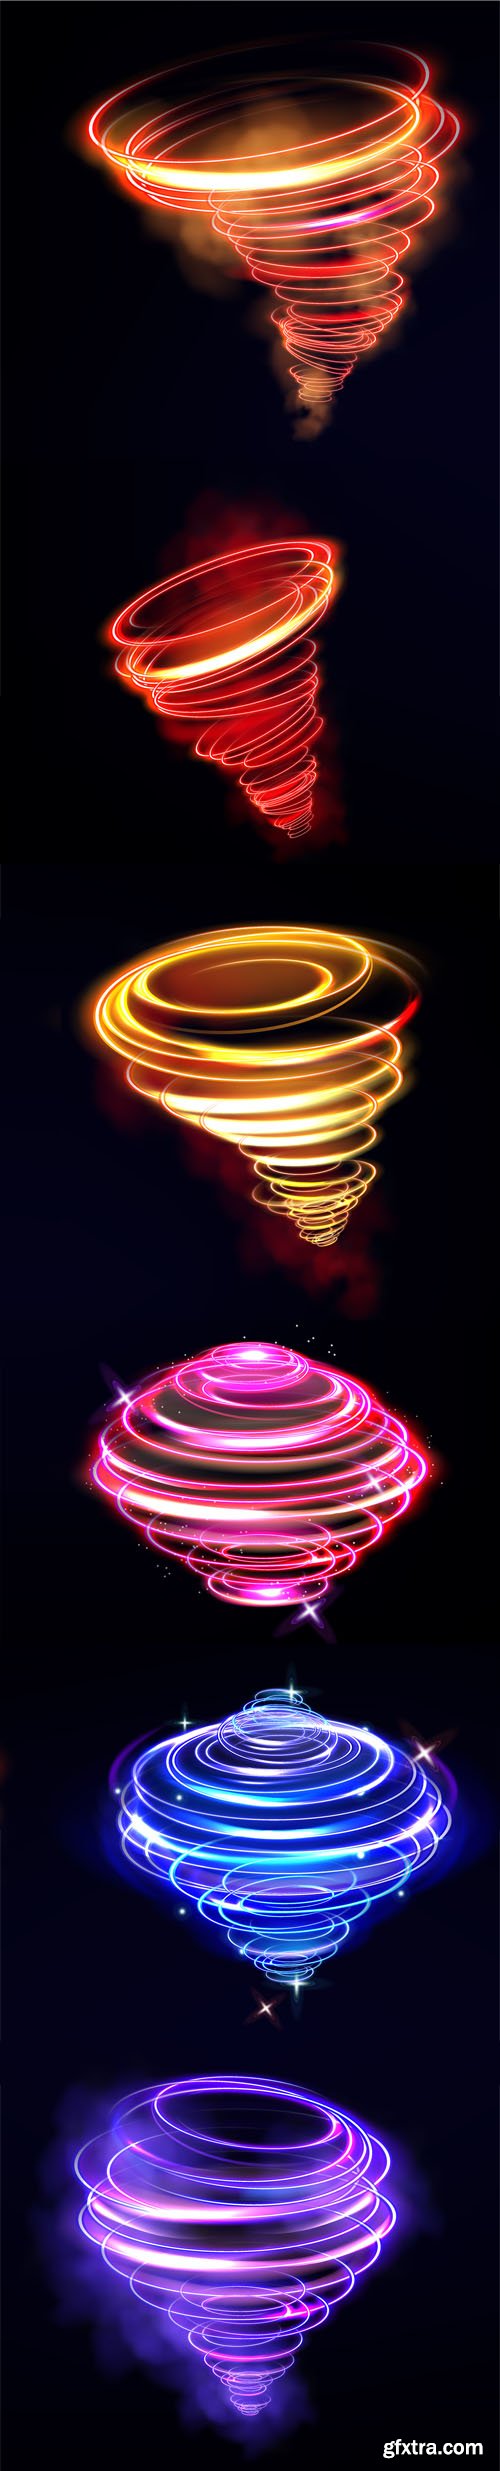 Neon Swirls Effects Vector Templates Collection